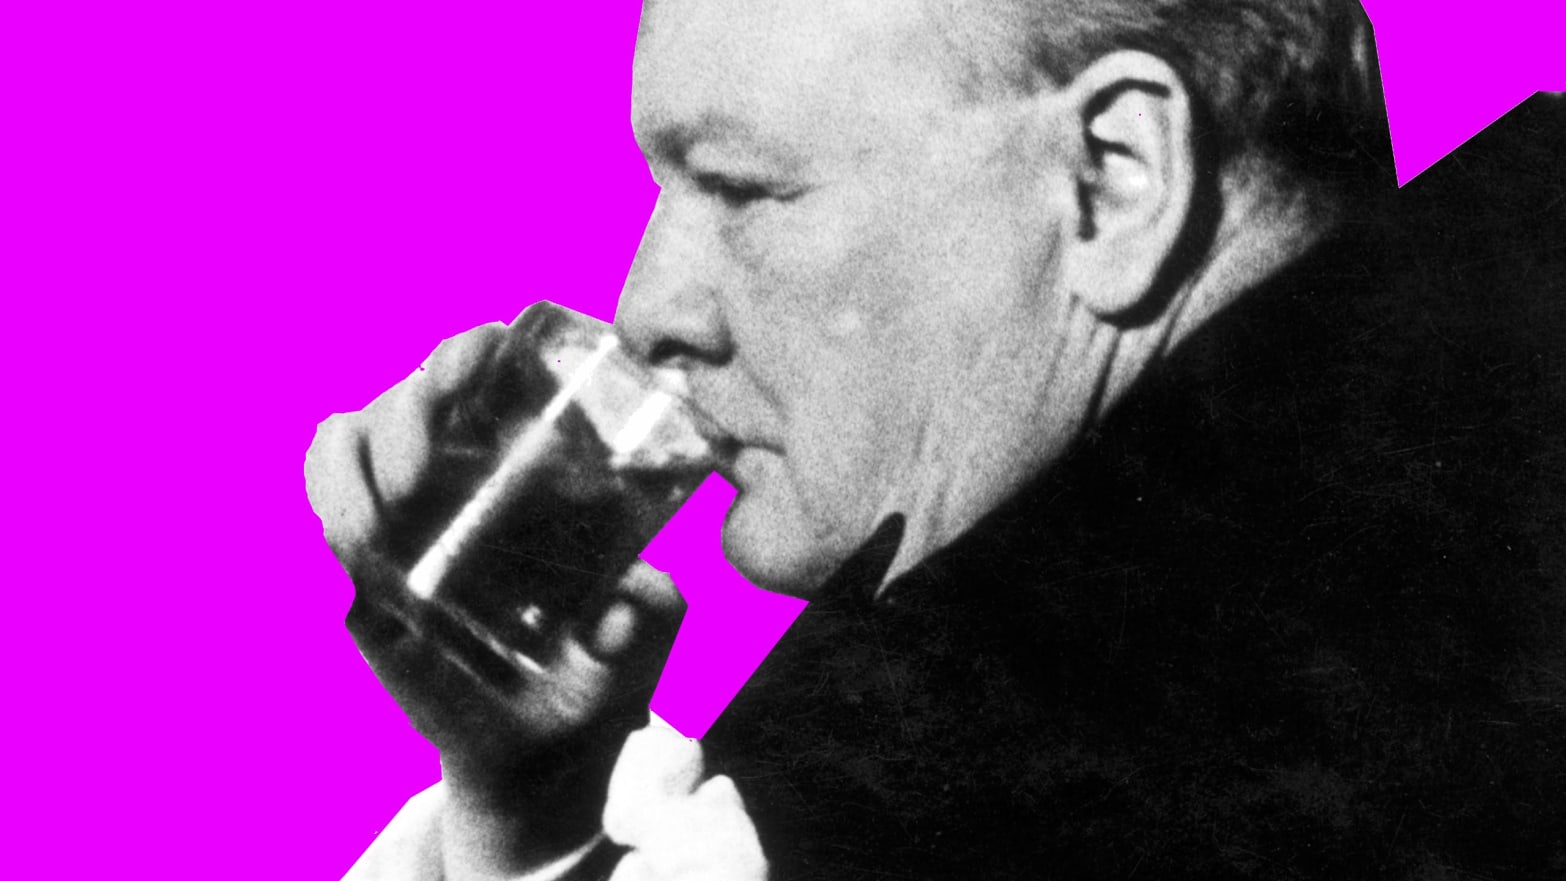 Winston Churchill, a notorious drinker, circumvented prohibition while visiting the U.S. by obtaining a letter from his doctor prescribing alcohol for treatment following a vehicular accident.